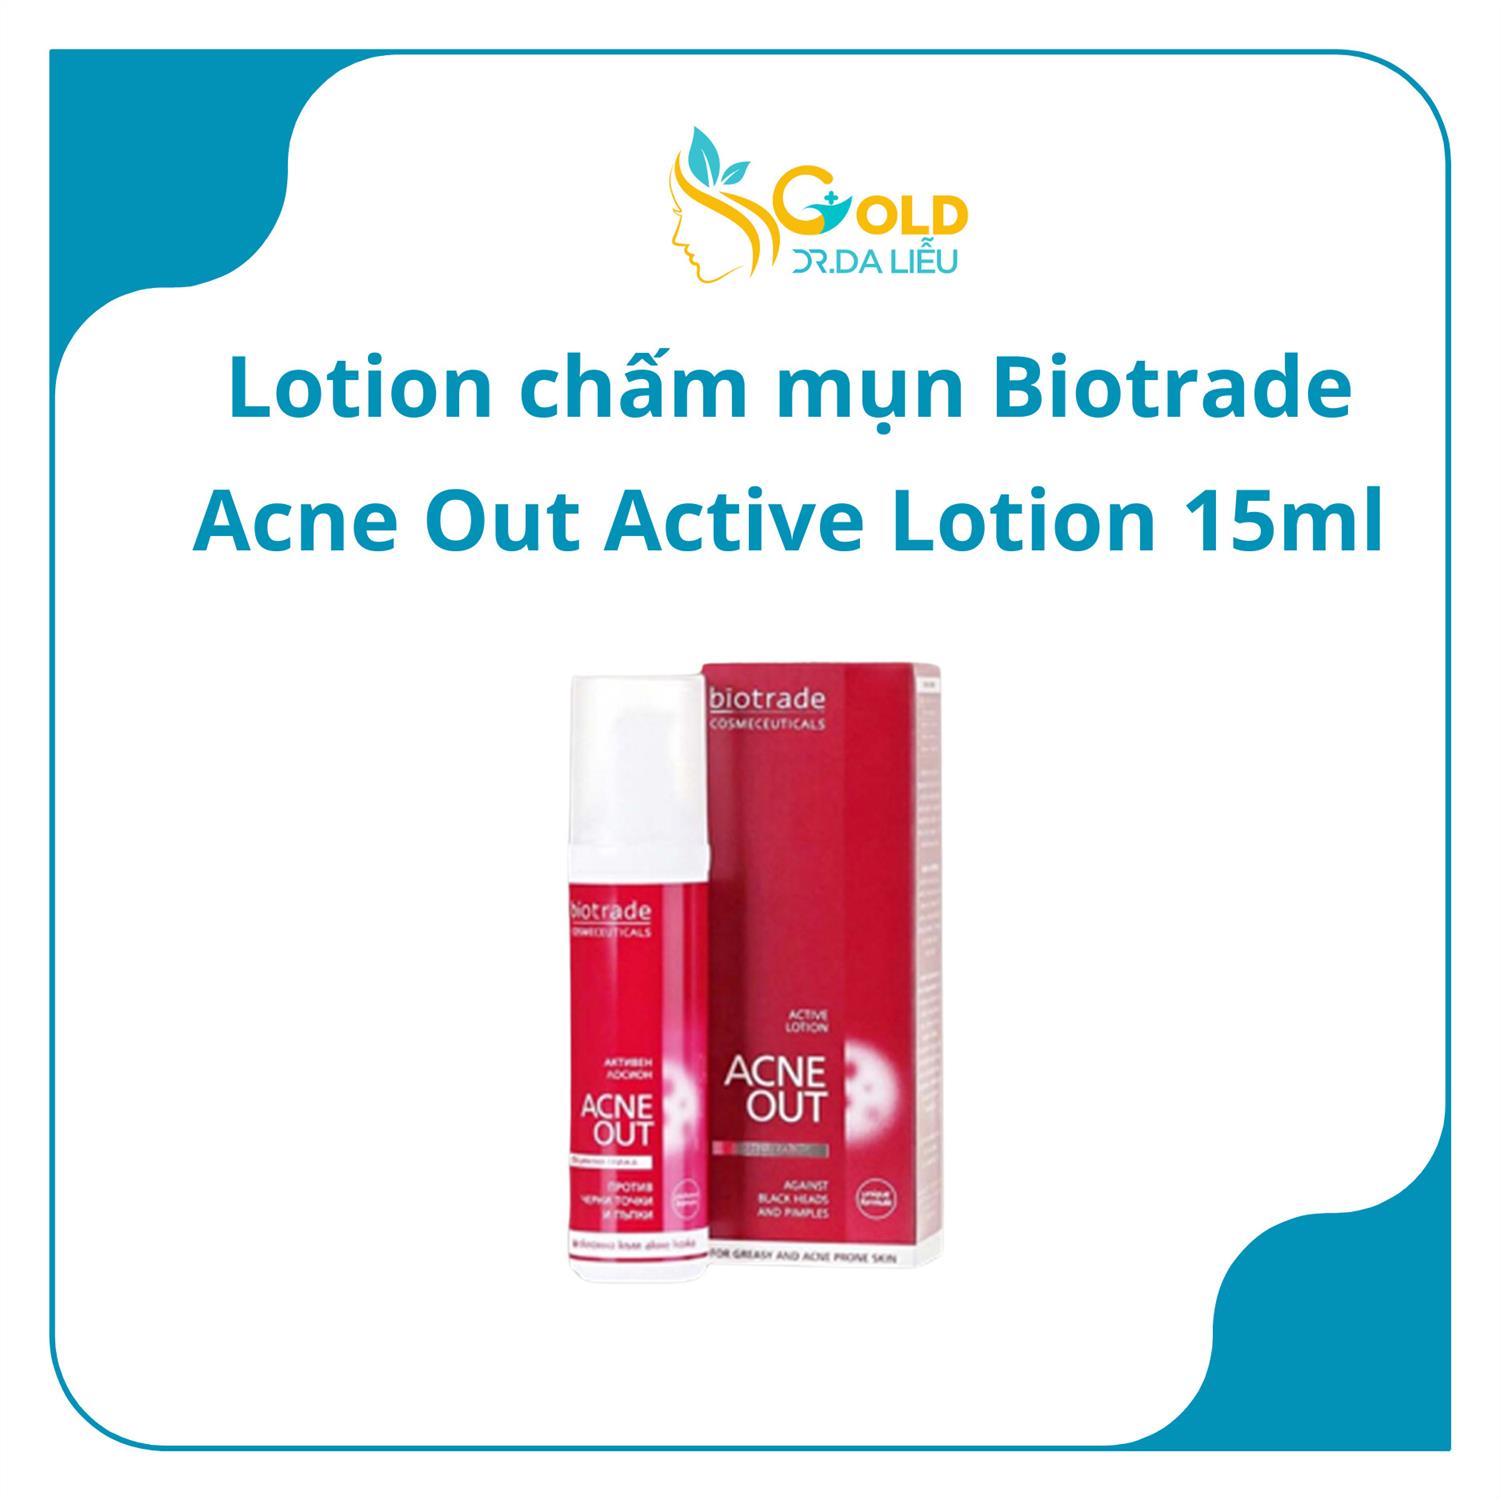 Lotion chấm mụn Biotrade Acne Out Active Lotion 15ml